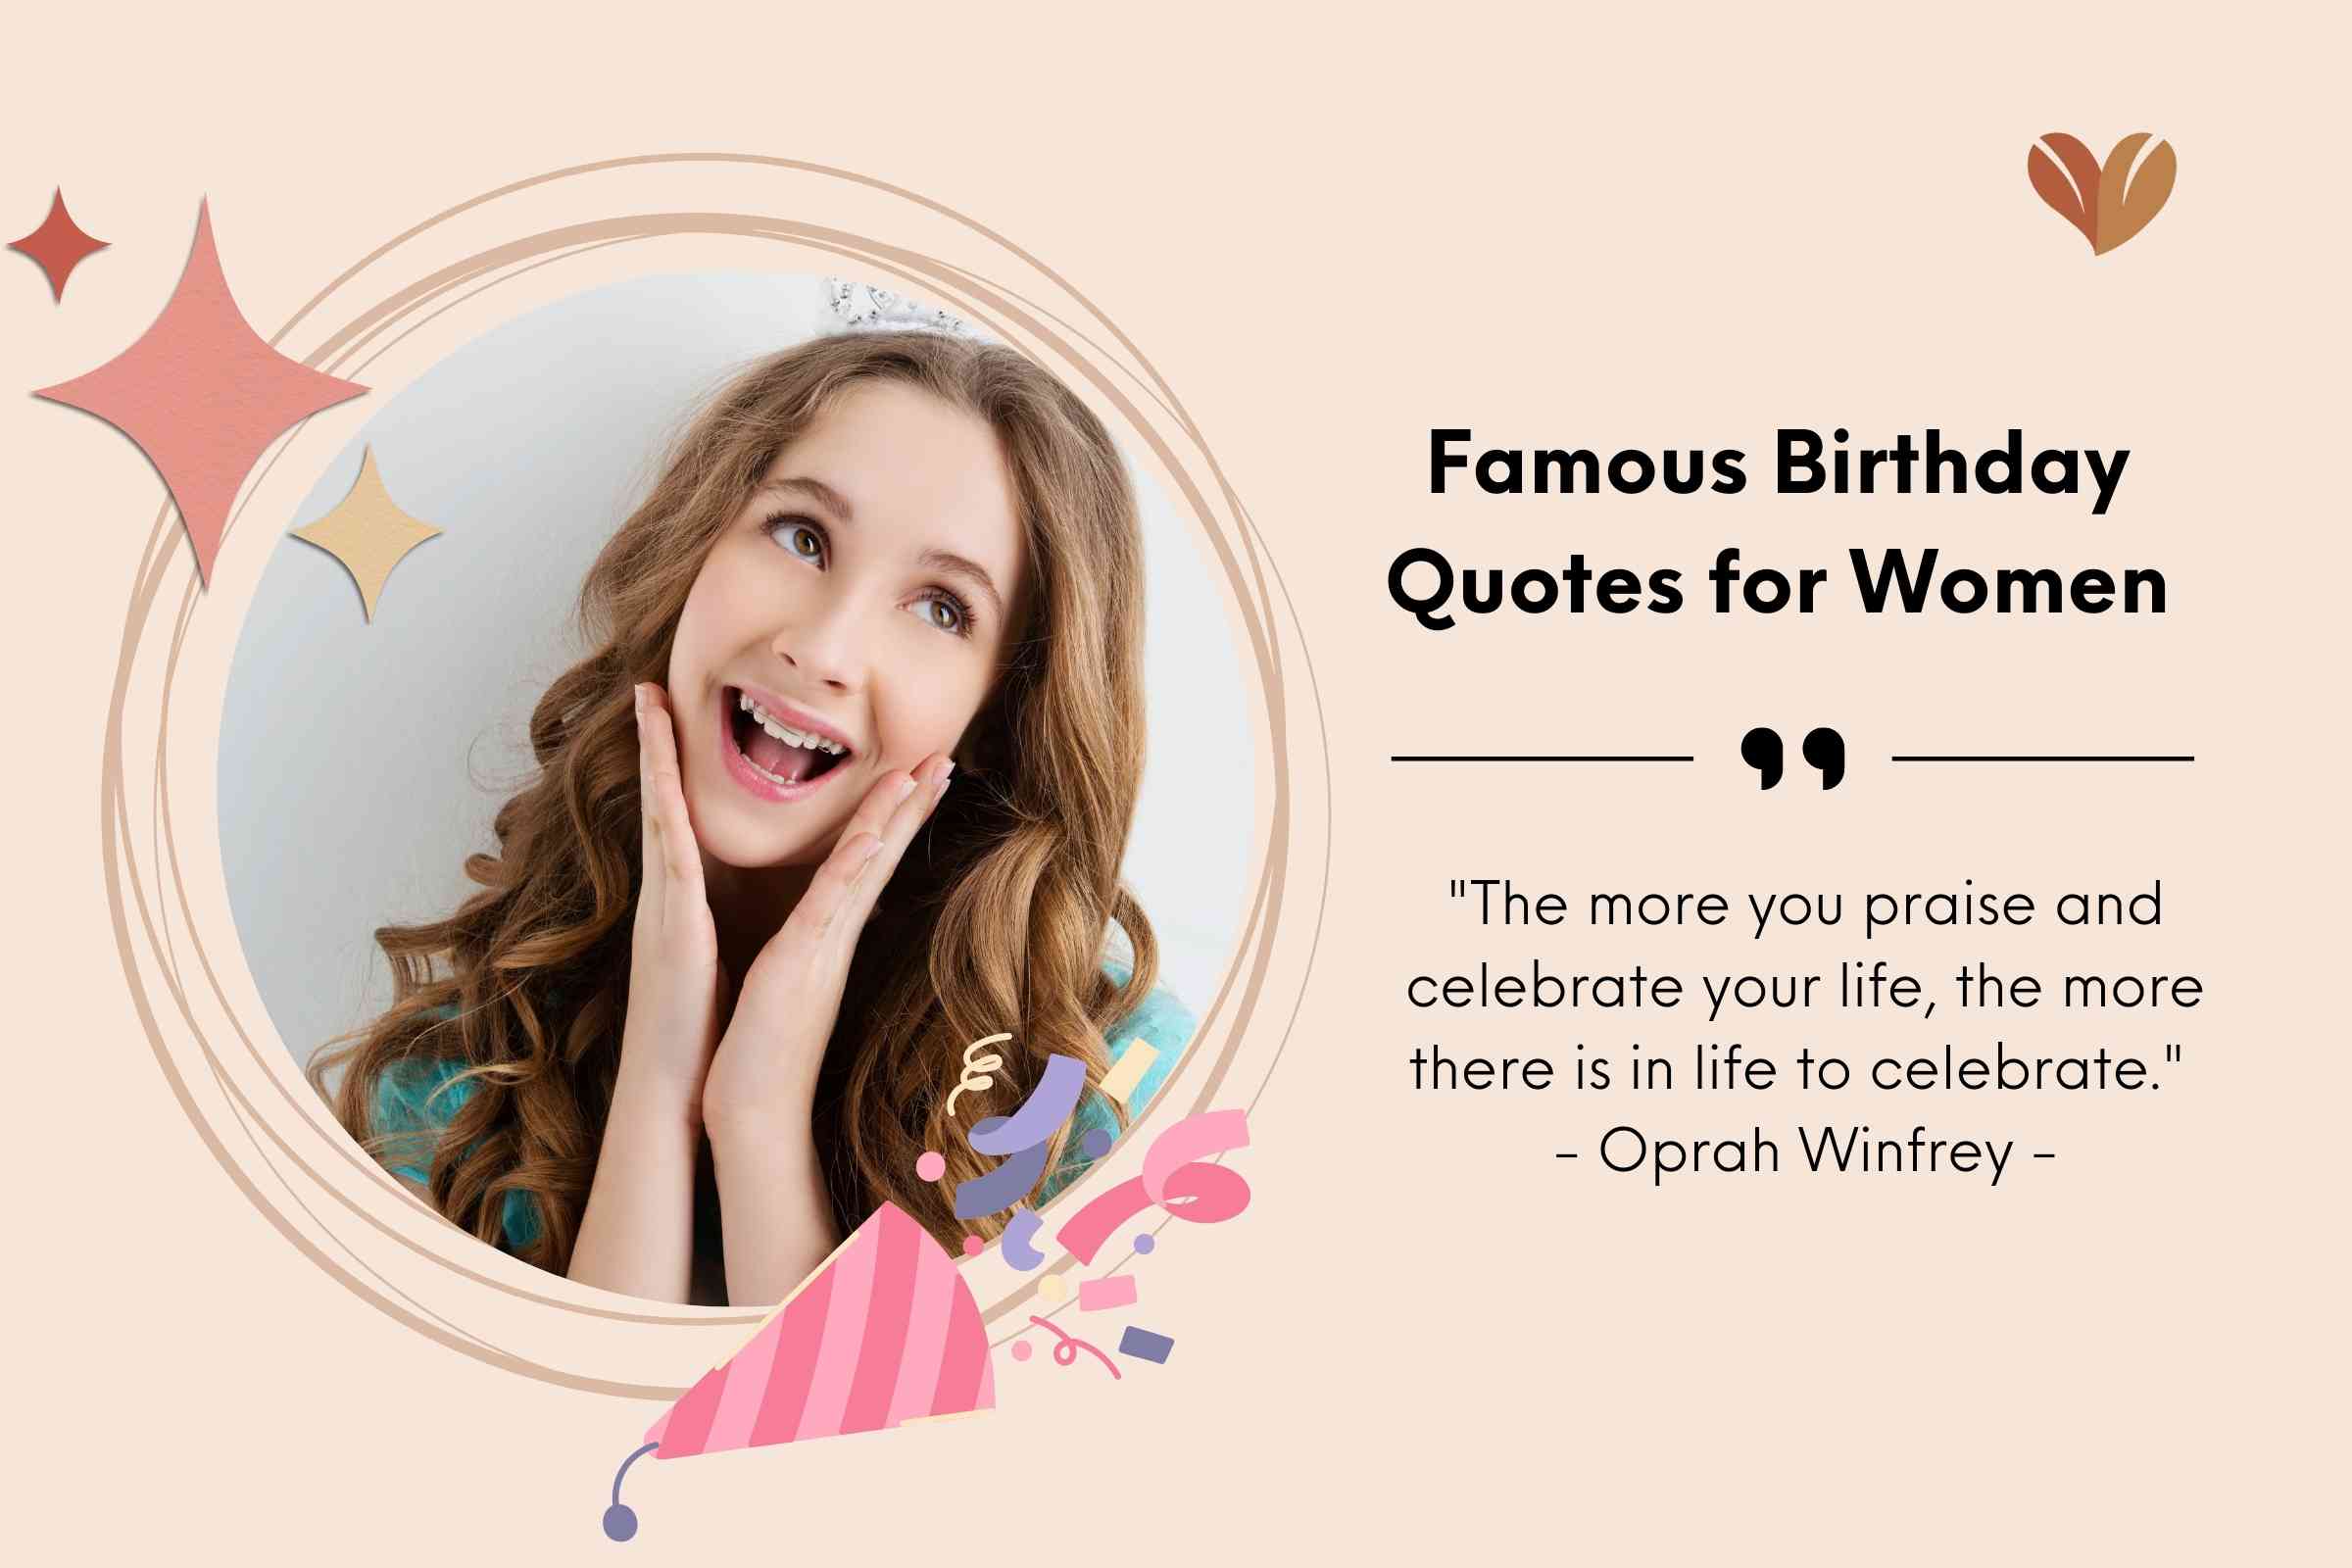 Famous Birthday Quotes for Women